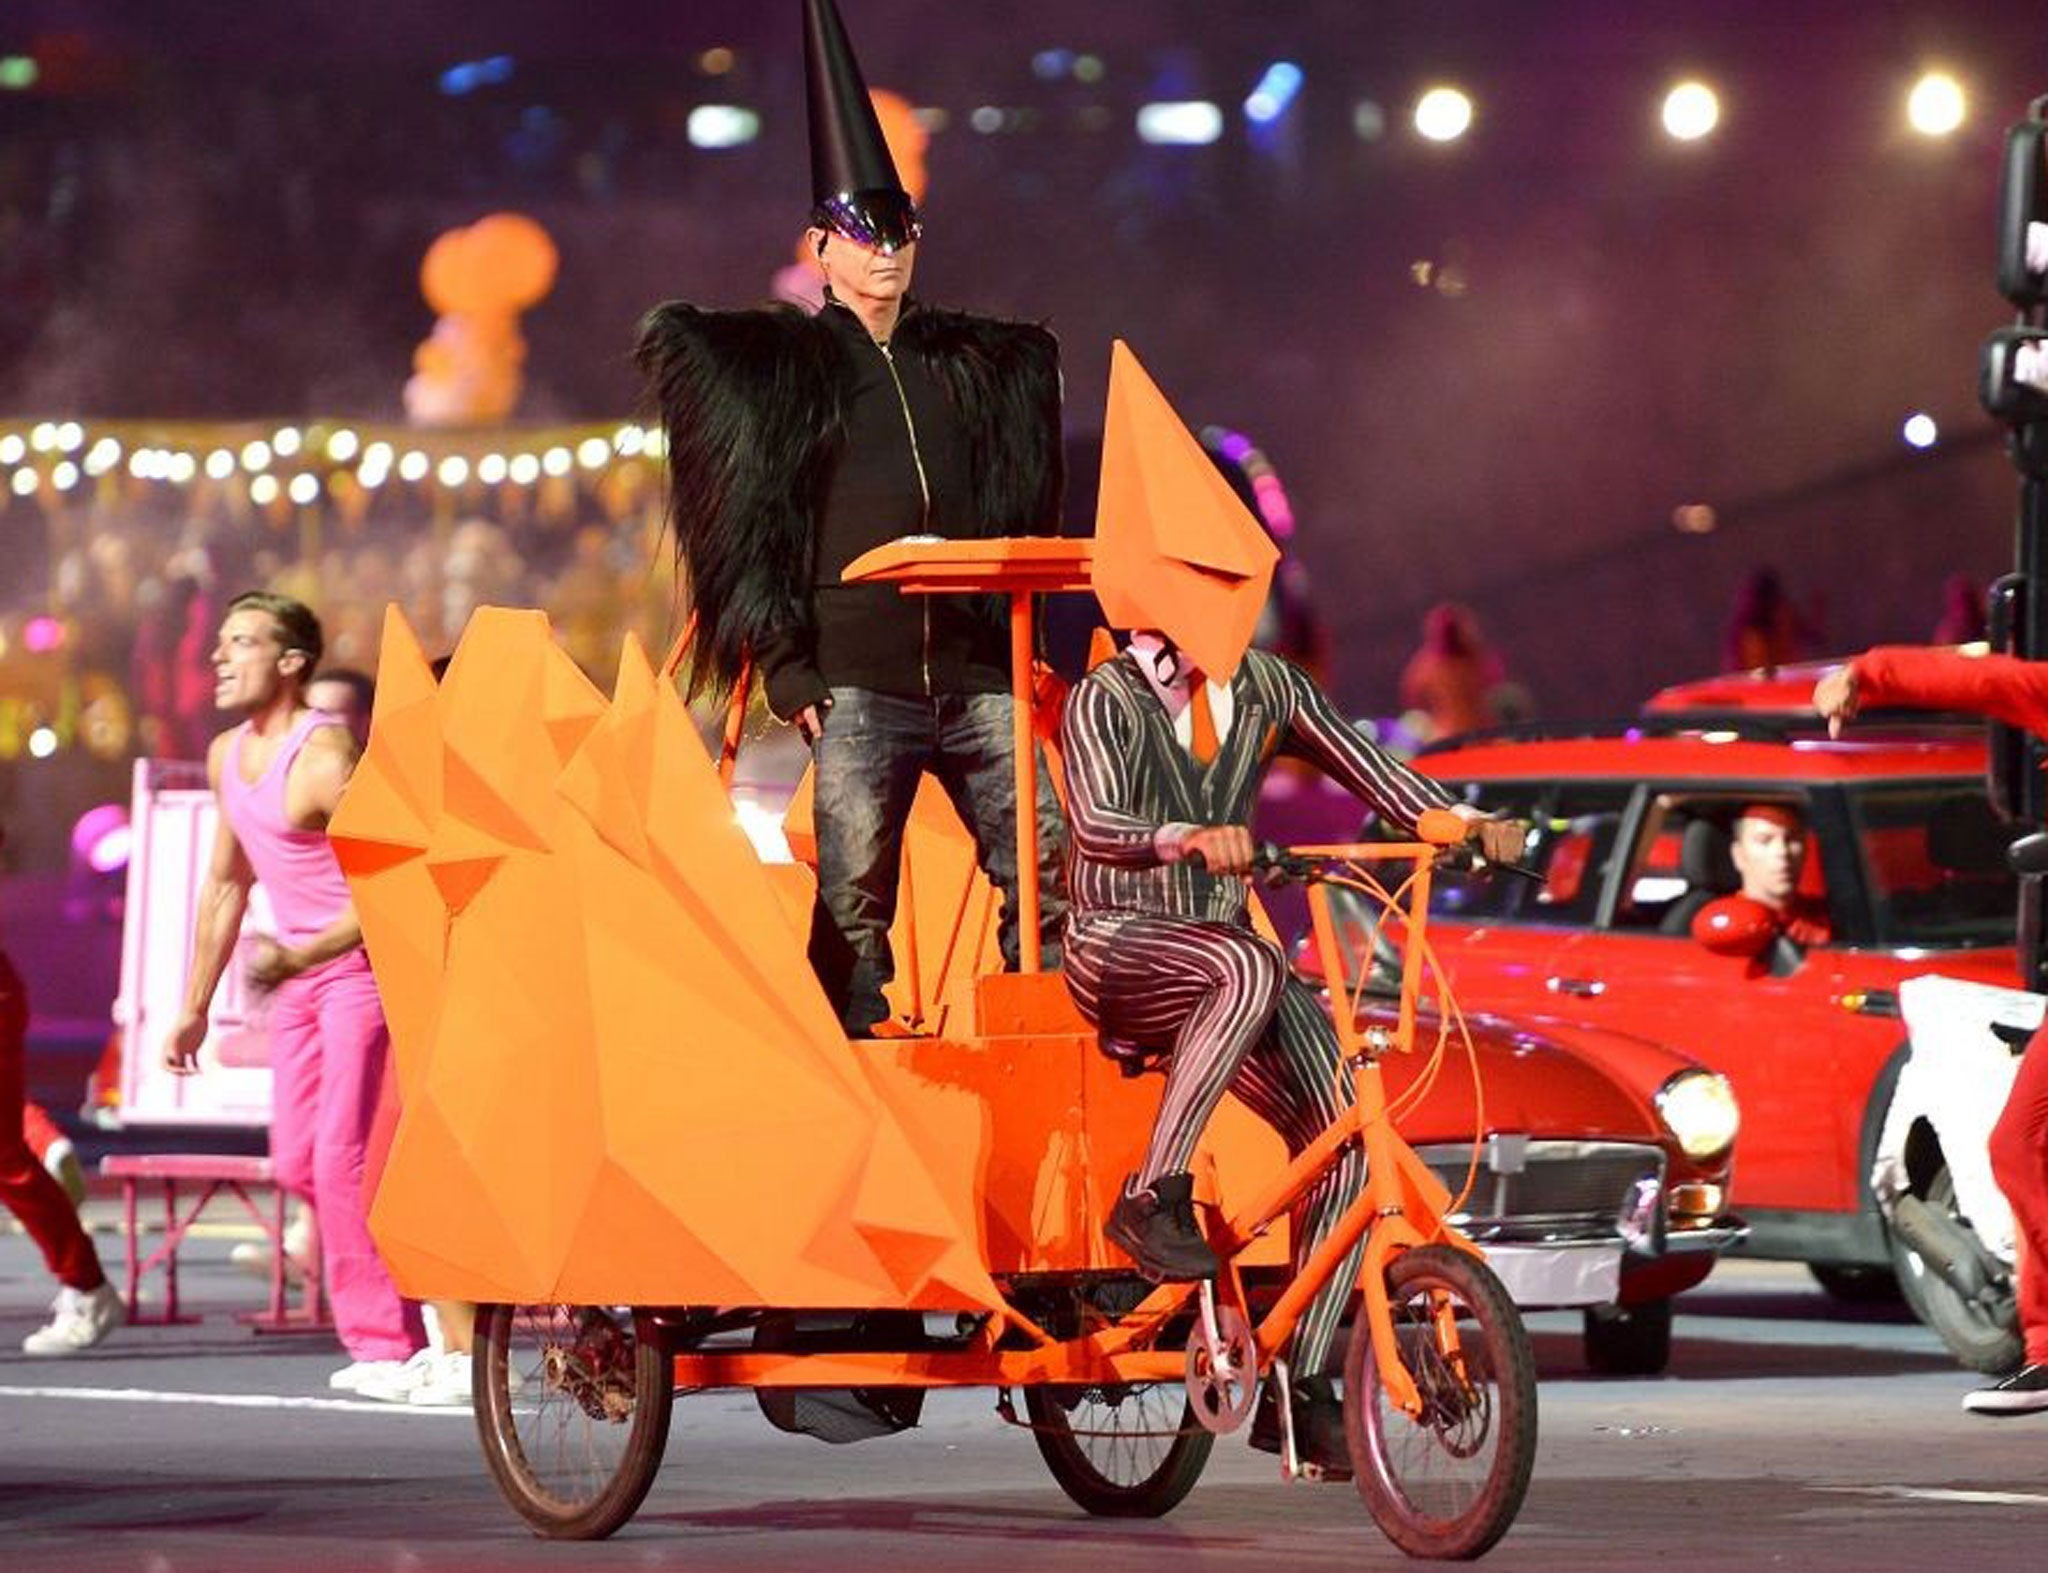 The Pet Shop Boys perform during the closing ceremony of the 2012 London Olympic Games